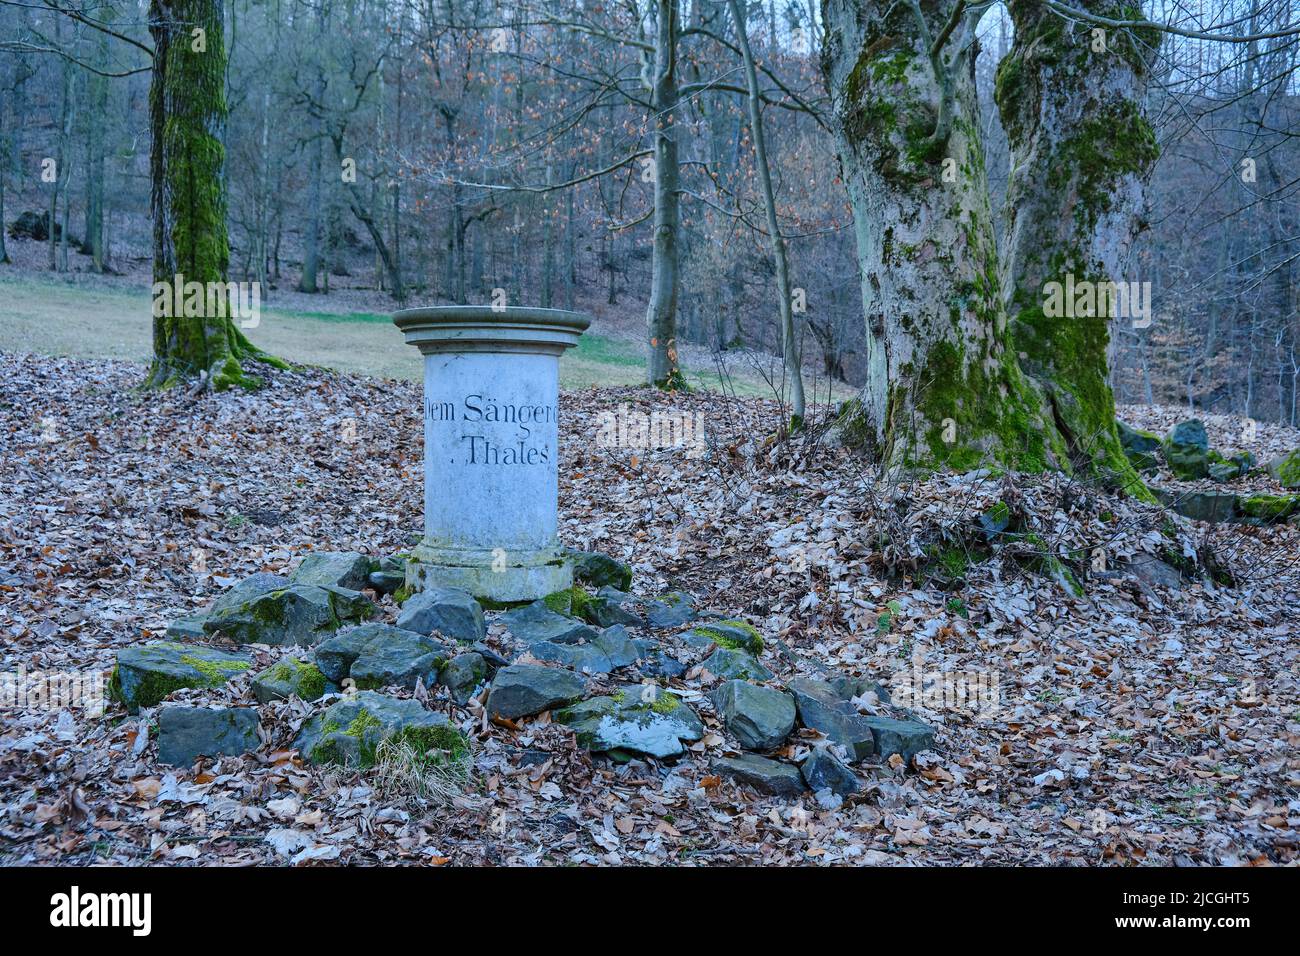 Seifersdorfer Tal, Wachau, Saxony, Germany: Staffage in the form of the memorial 'To the Singer of the Valley' in the park of the Seifersdorfer Tal. Stock Photo